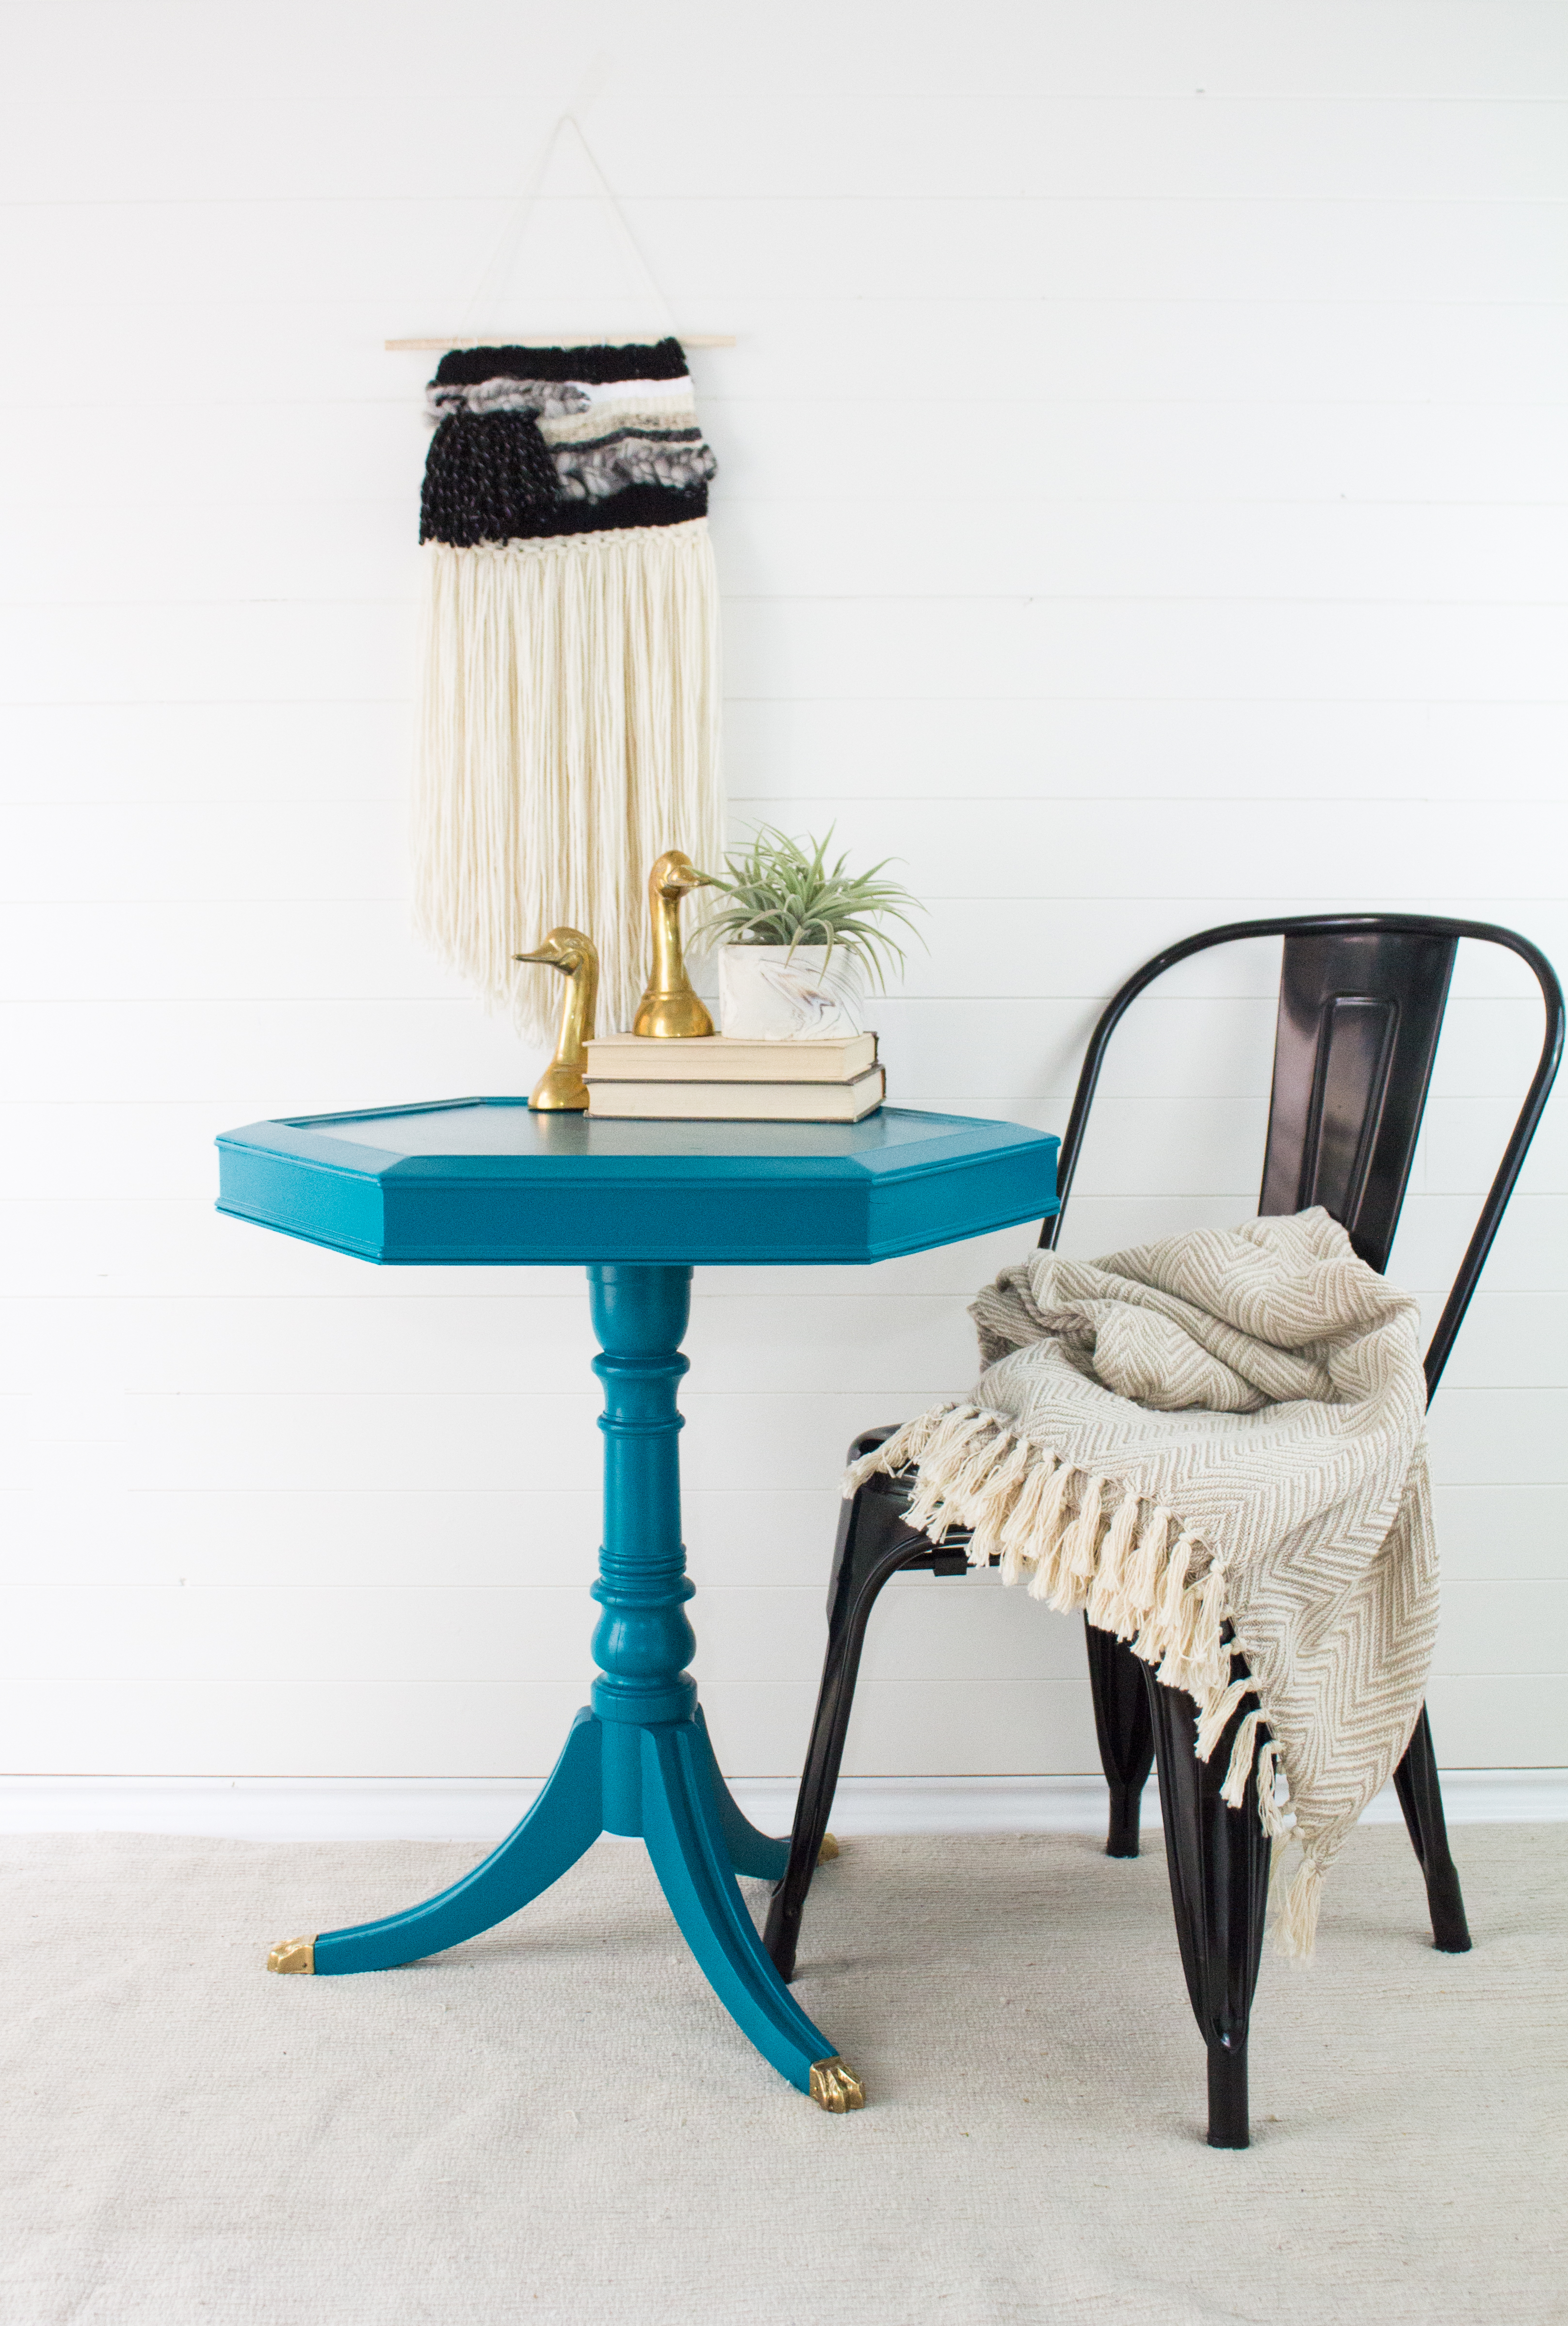 A bold little table in “Reverie”